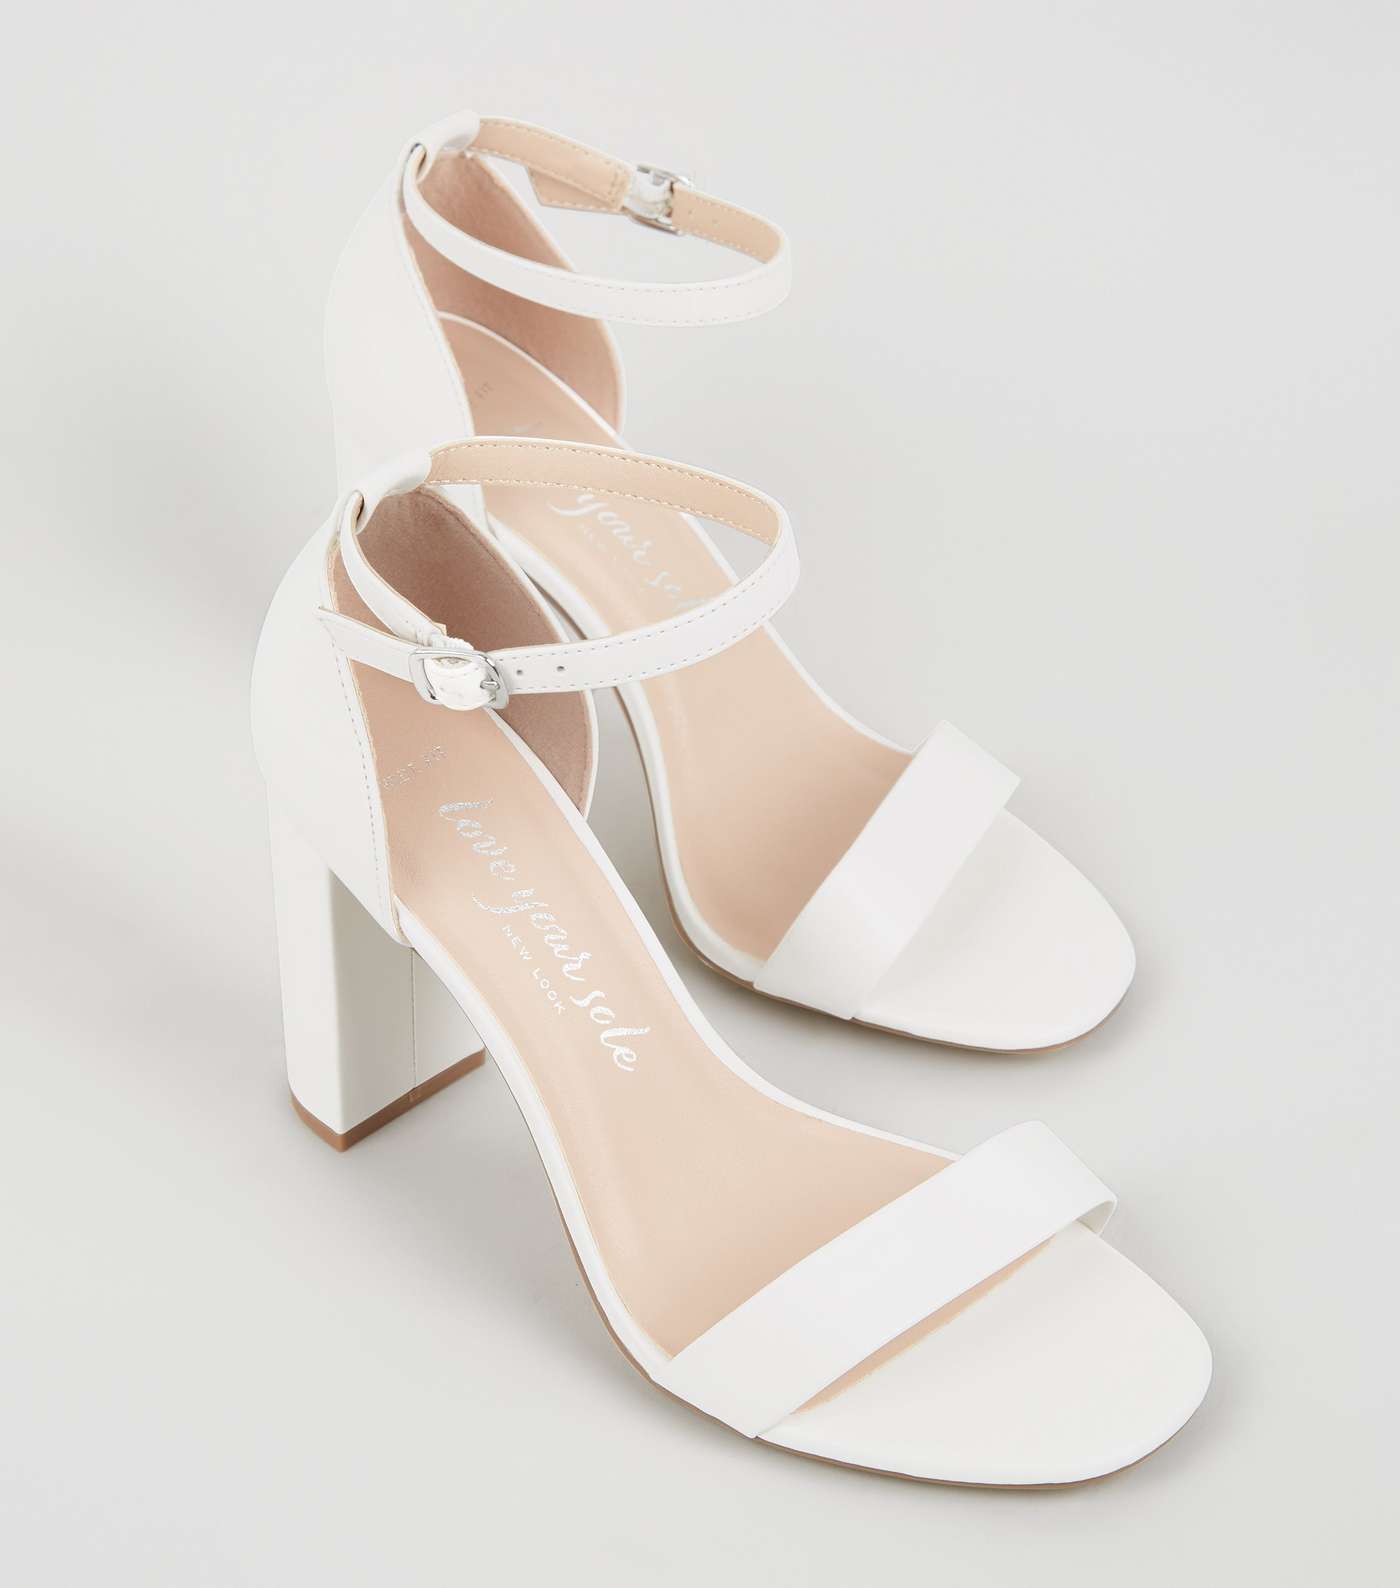 Wide Fit White Leather-Look 2 Part Block Heels Image 3